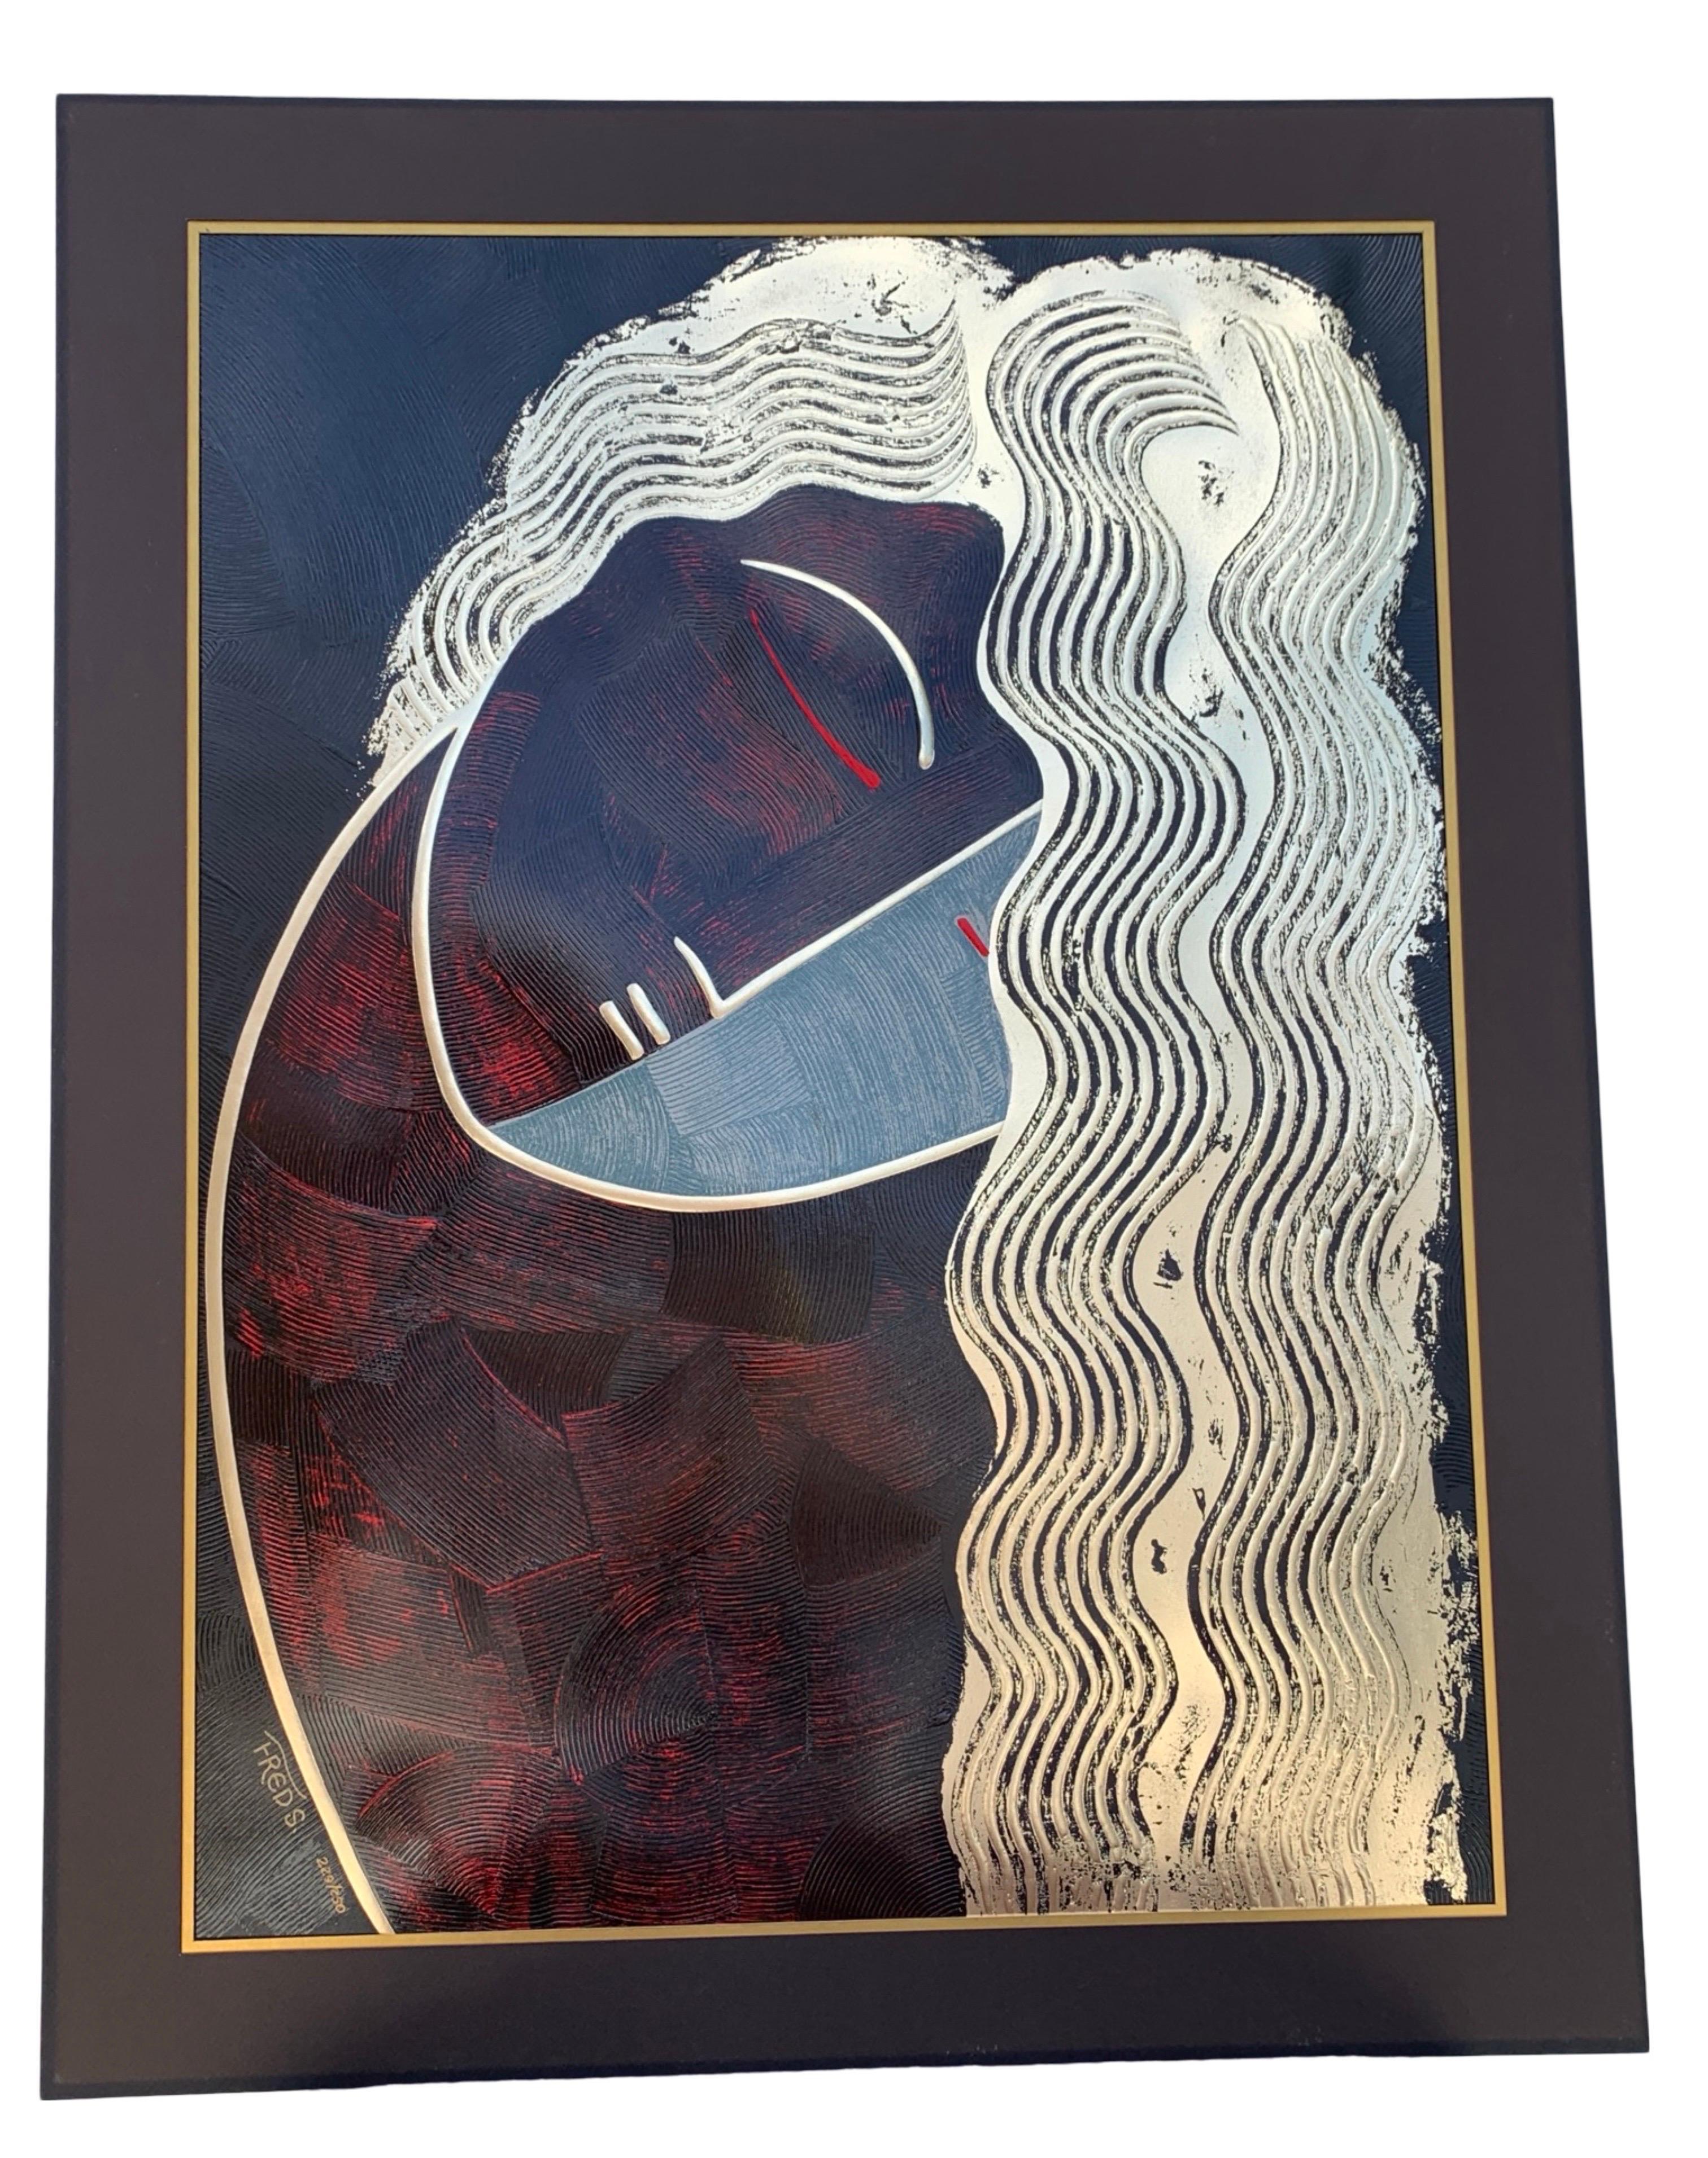 Purchased iat Dyansen Gallery New York City, 1991 (sticker remains on verso)

Late 20th Century Fred Stepanian female “God of Waves” acrylic limited edition serigraph. Composition consists of rich, deeply textured shades of gold metallic and deep